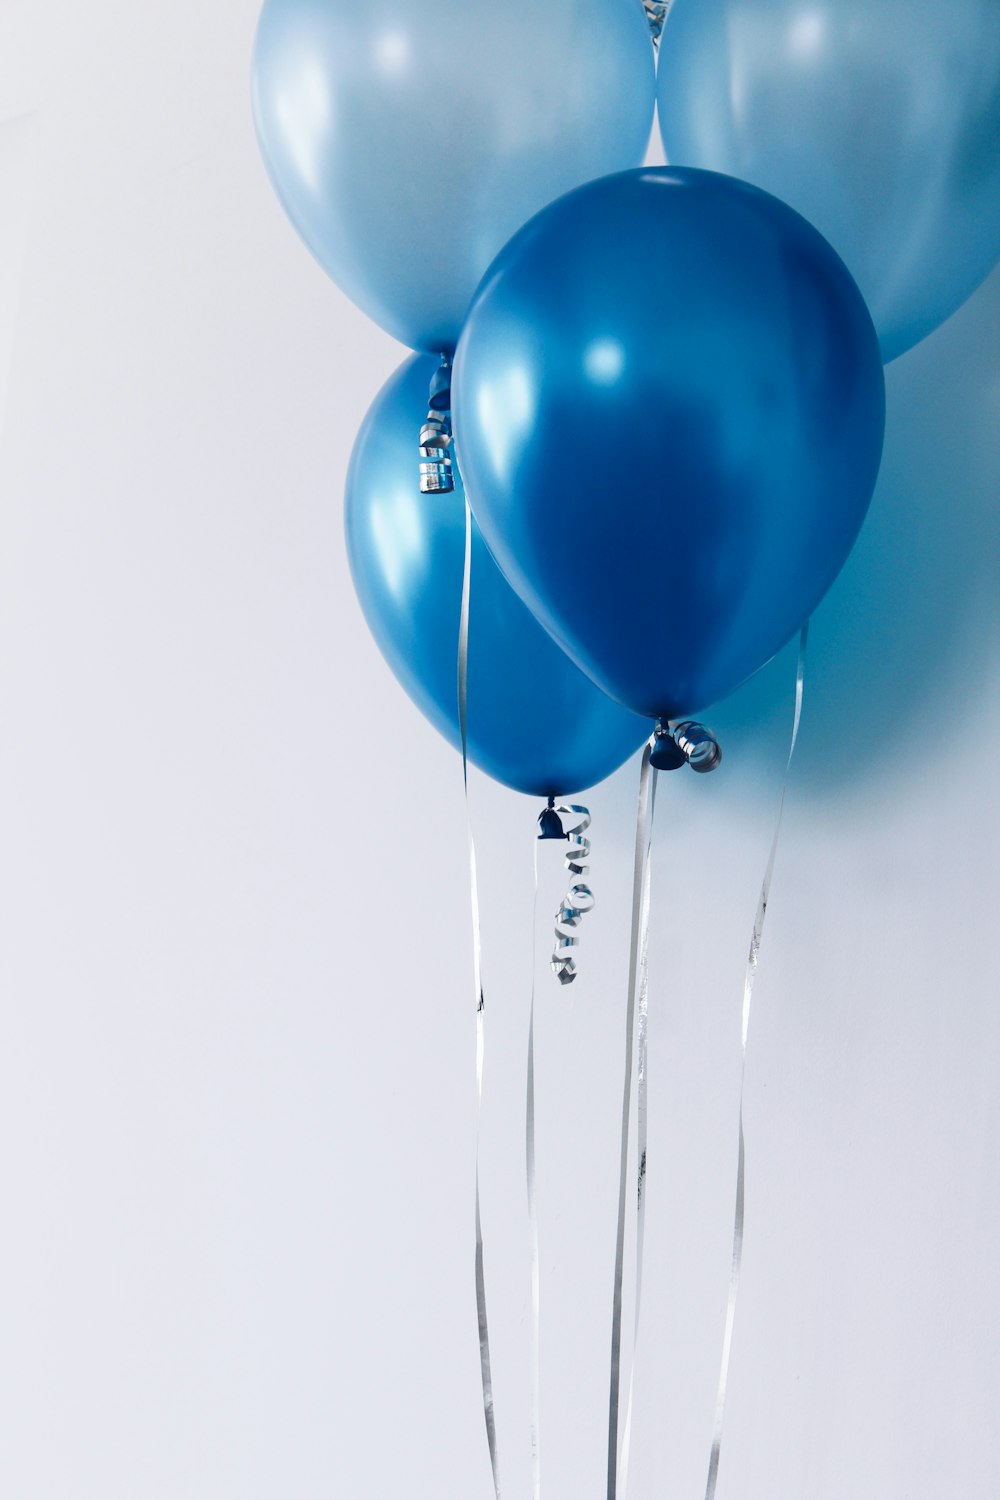 Best 500+ Balloon Images | Download Free Pictures on Unsplash